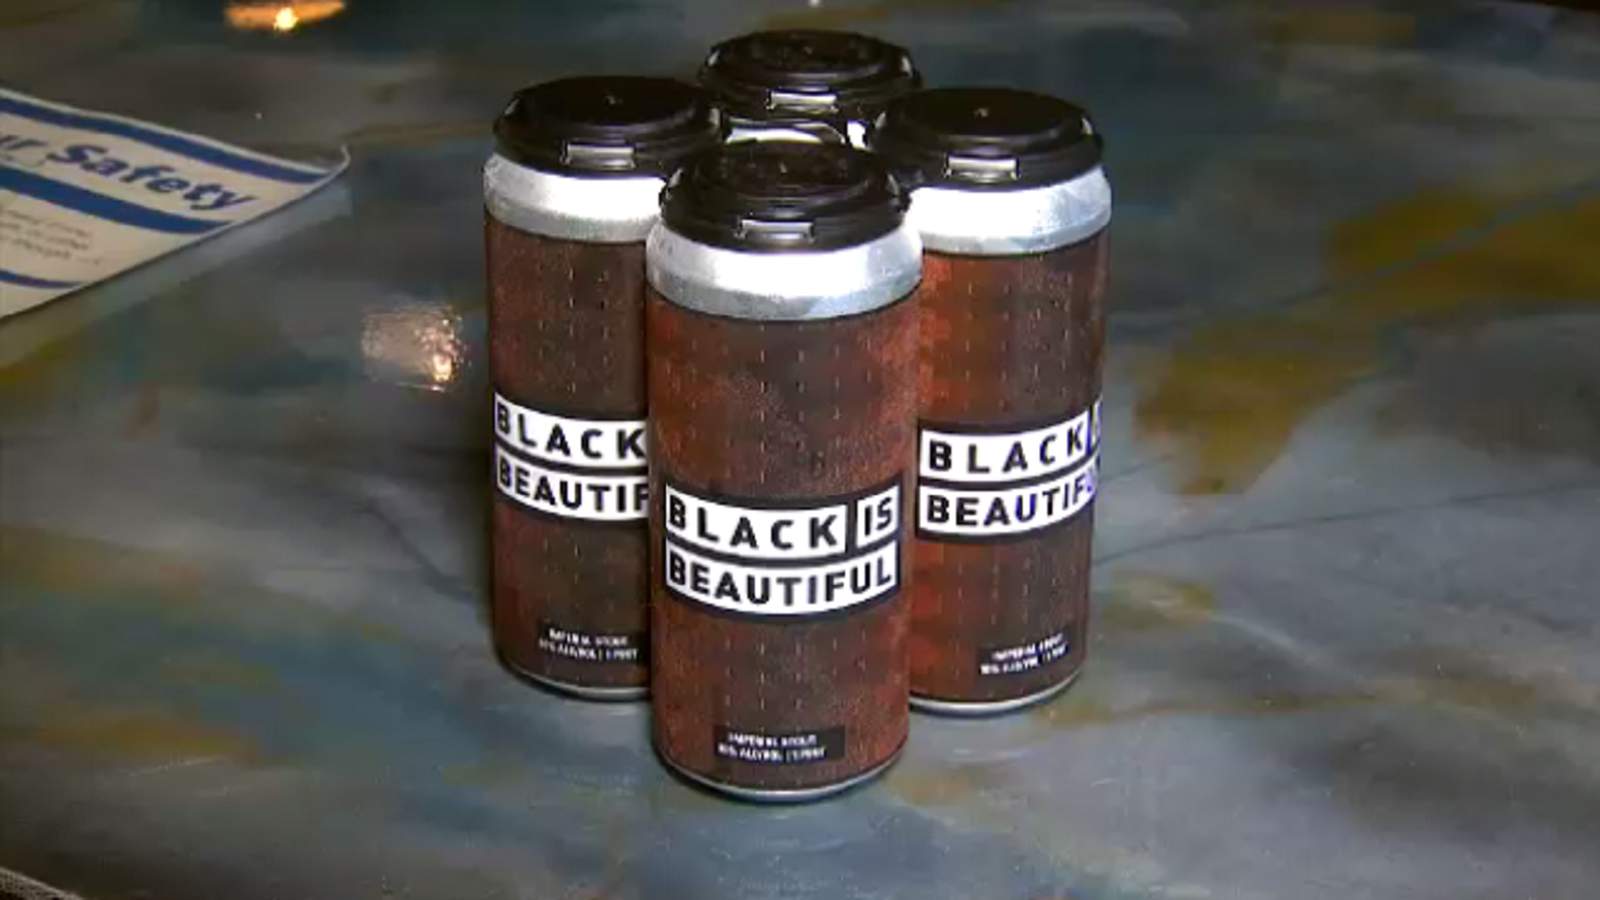 Here’s how one local brewery is showing support for the Black is Beautiful movement